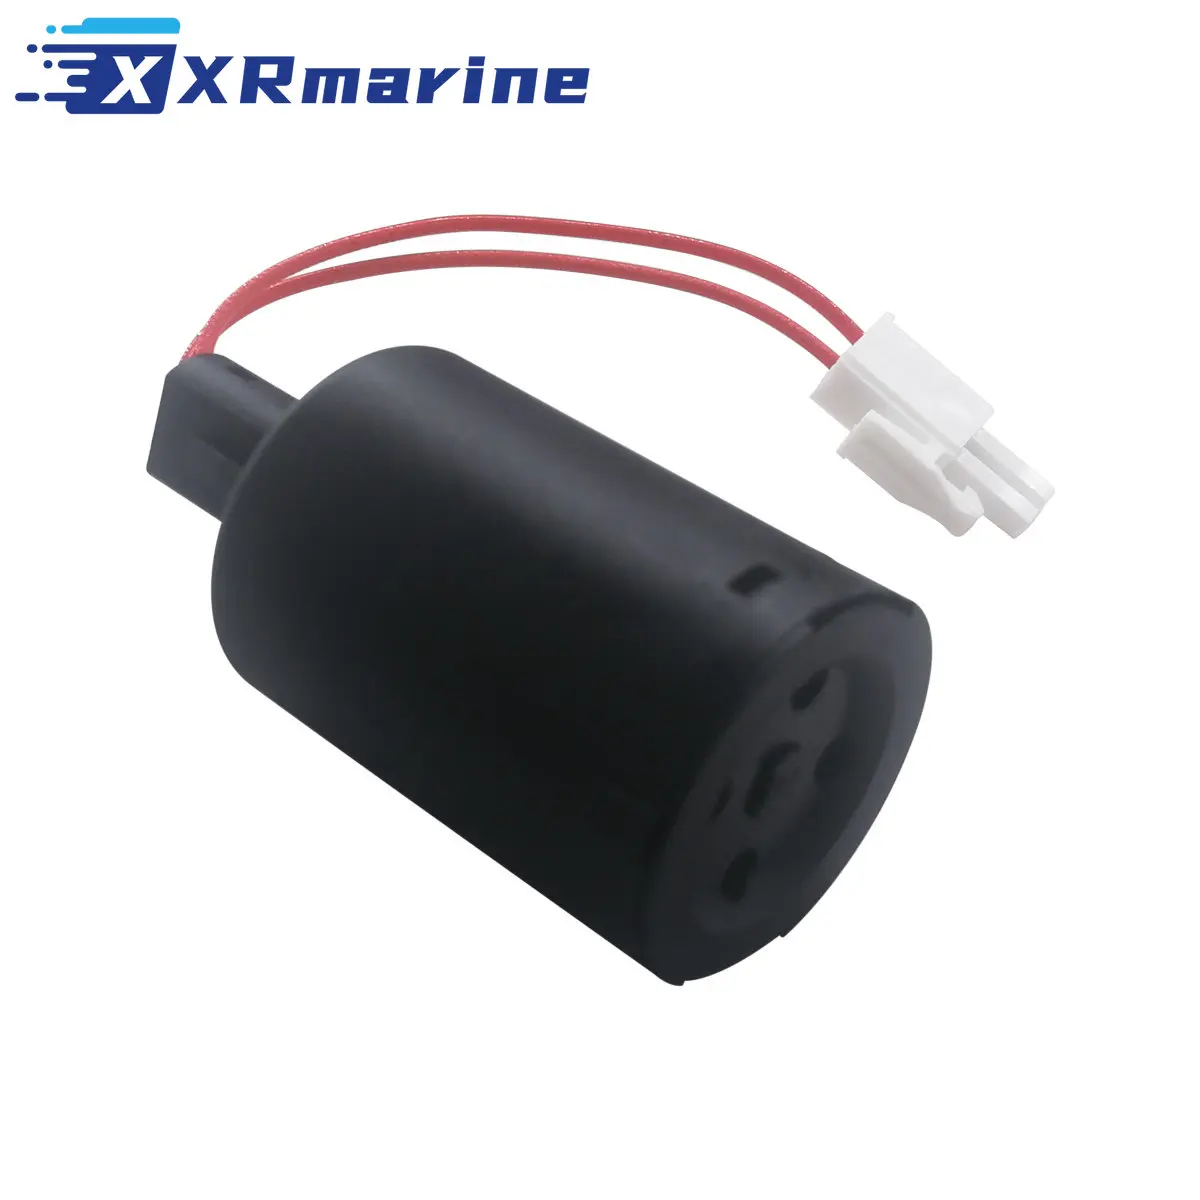 8M6000359 Float Fuel Switch for Mercury Mercruiser 8M0007943 880596504 Boats Part 880596522 880596524